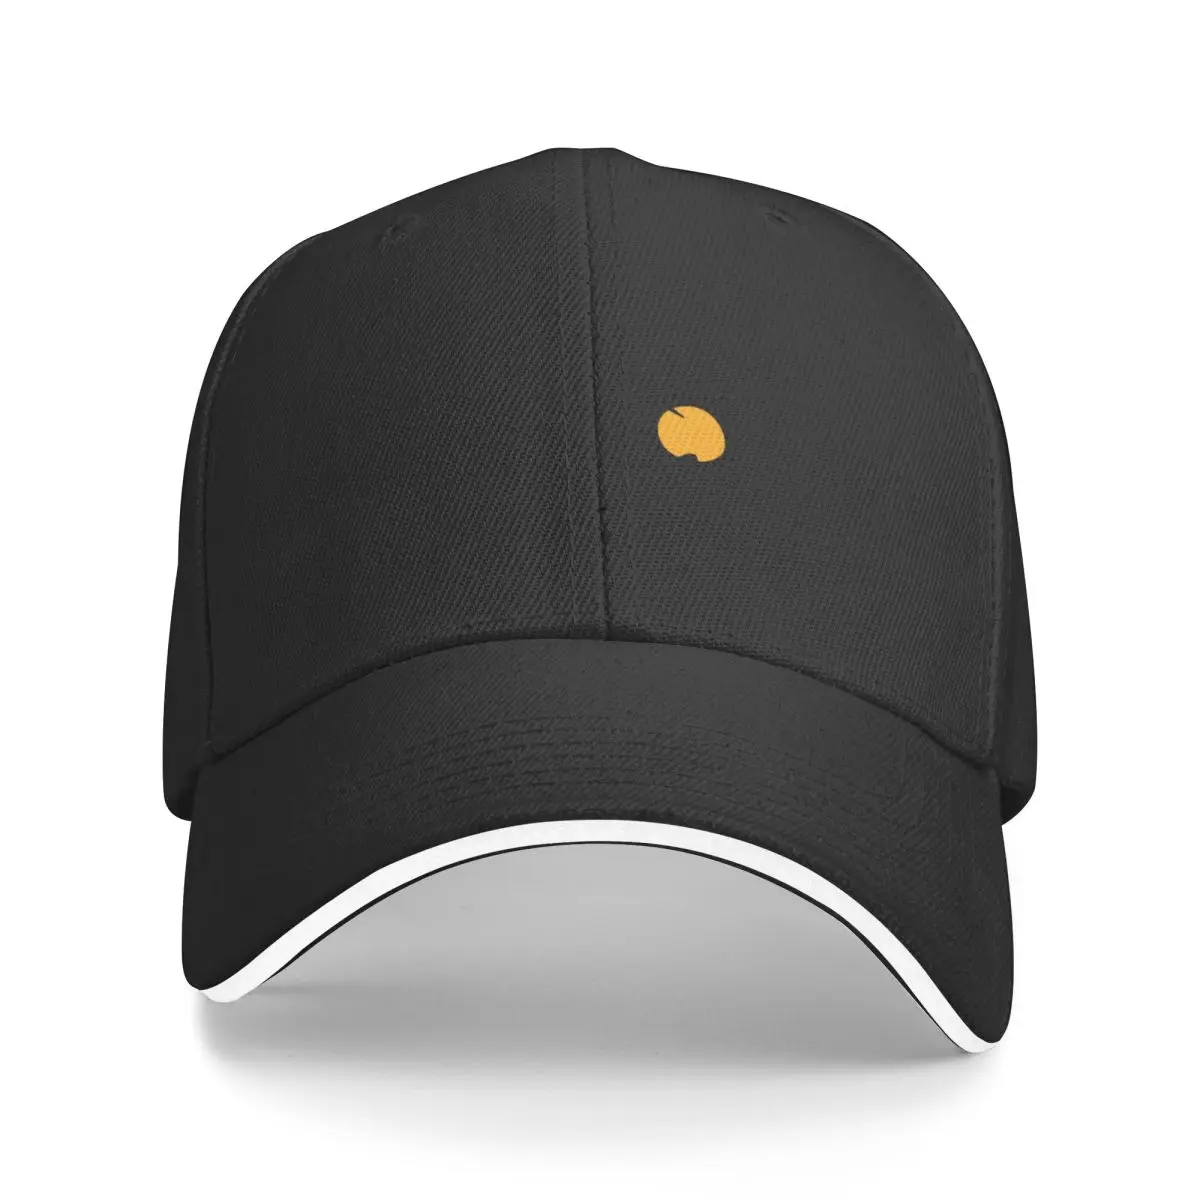 

New BEST TO BUY - Le Tour de Franc Perfect Gift For you and friends Baseball Cap New Hat Golf Hat Men Women's